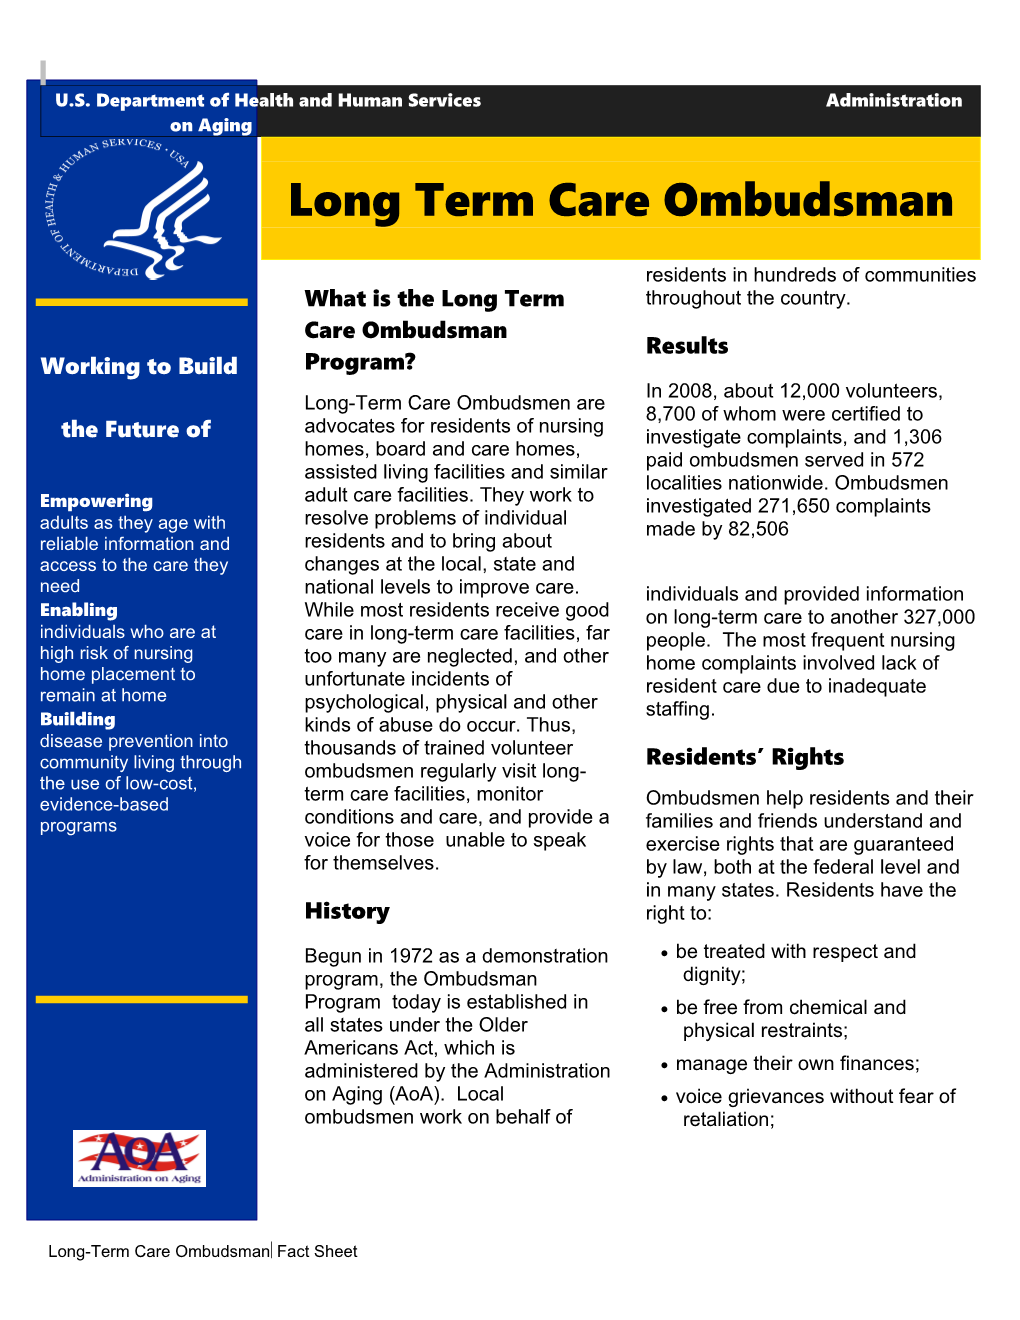 U.S. Department of Health and Human Services Administration on Aging